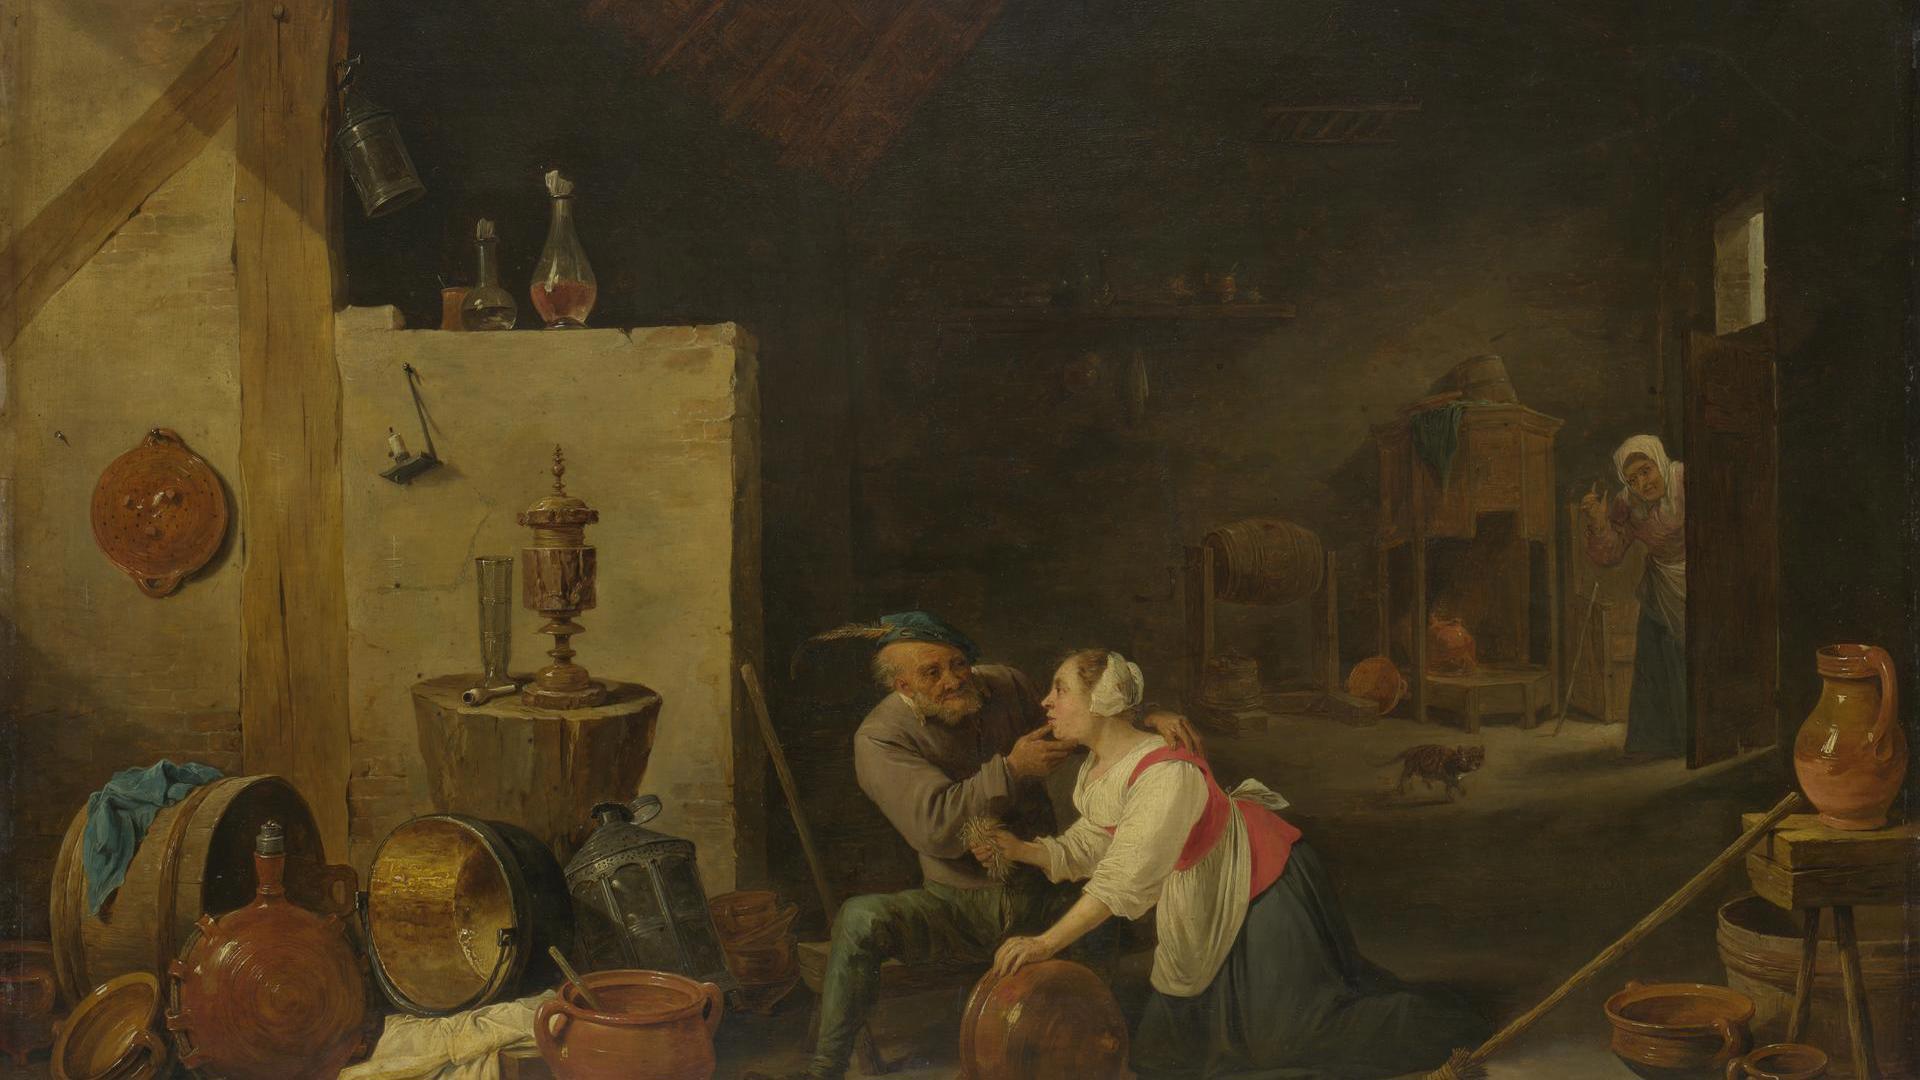 An Old Peasant caresses a Kitchen Maid in a Stable by David Teniers the Younger